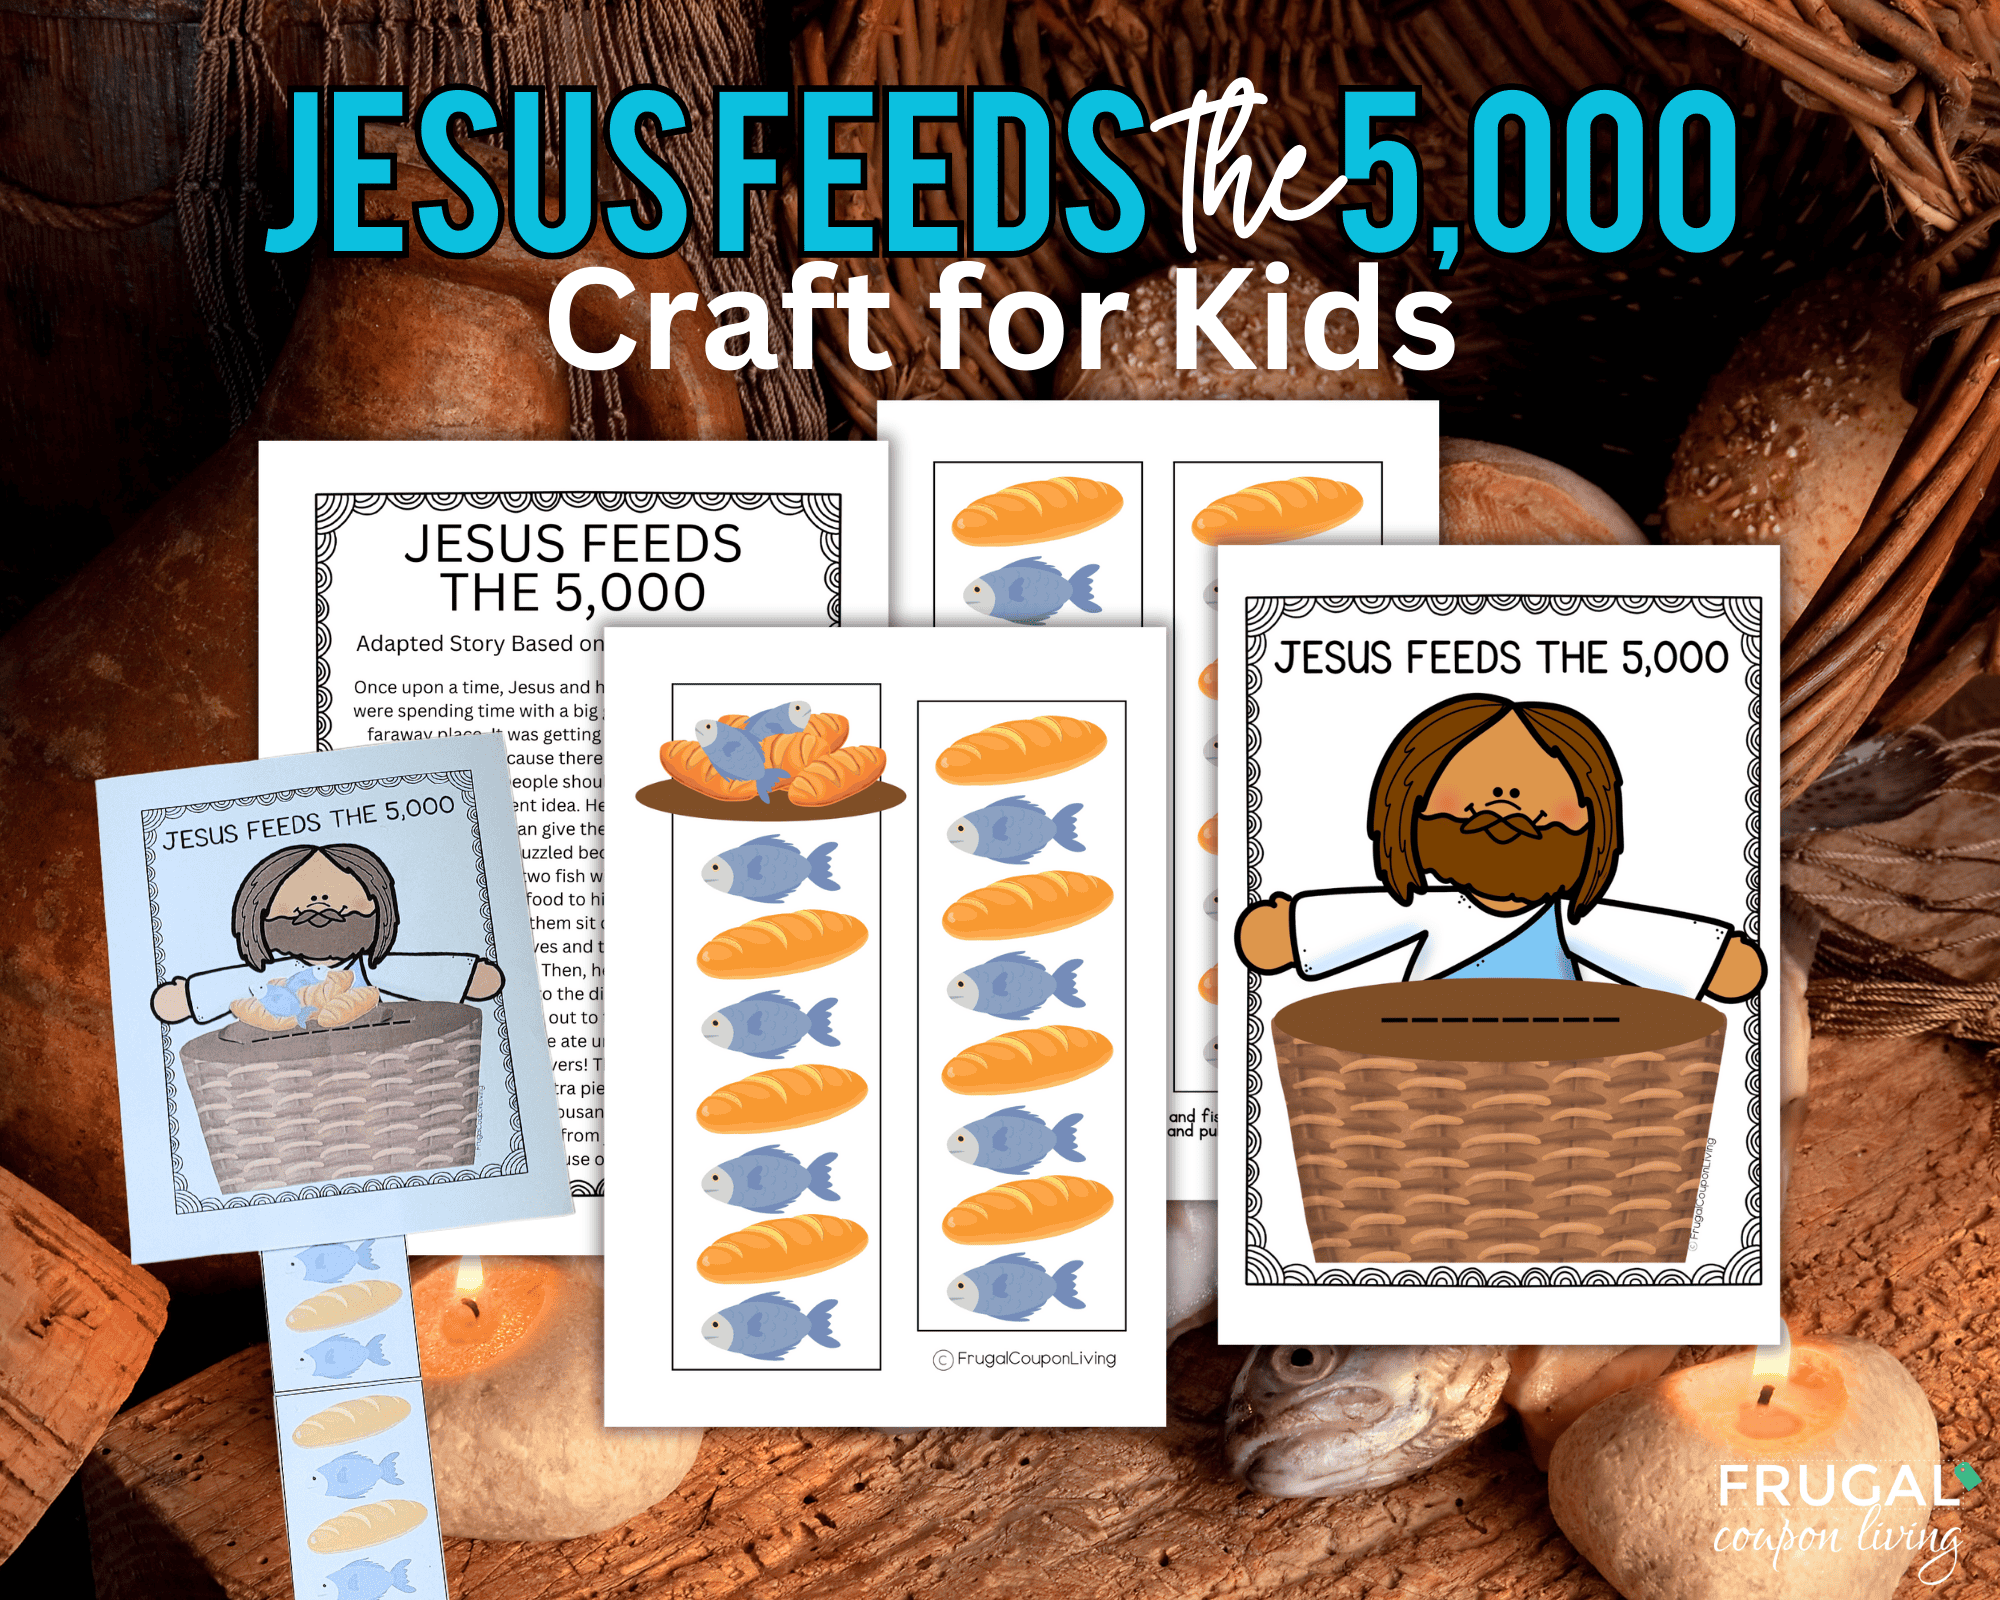 Jesus feeds the 5,000 craft for kids